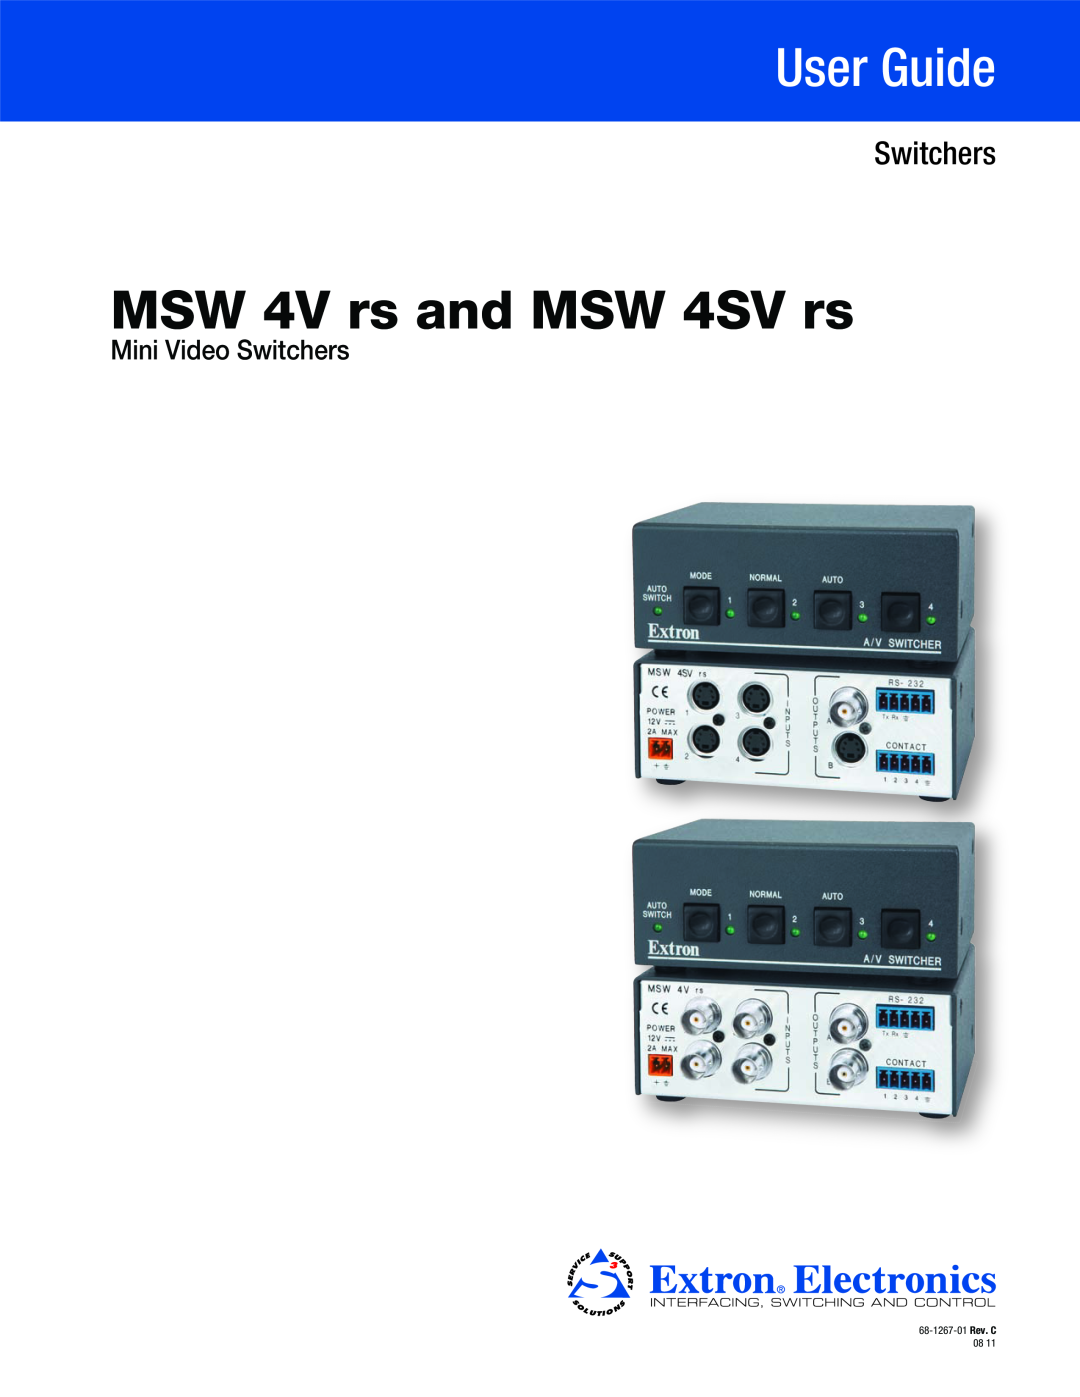 Extron electronic MSW 4SV RS specifications Video - MSW 4V rs, MSW 4SV rs, Video - MSW 4V SDI rs, Video input 